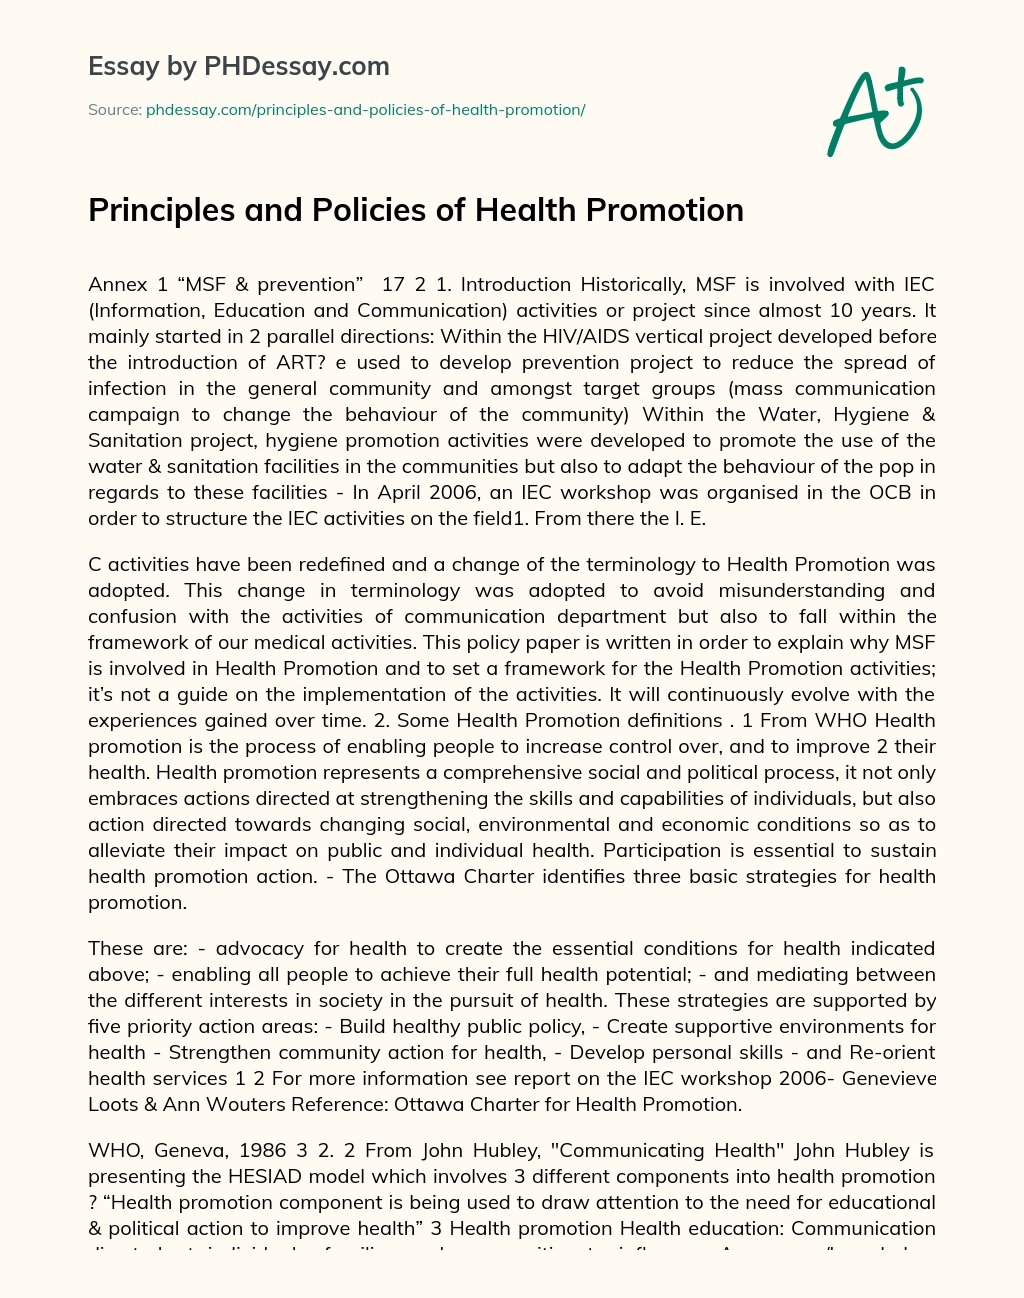 Principles and Policies of Health Promotion essay